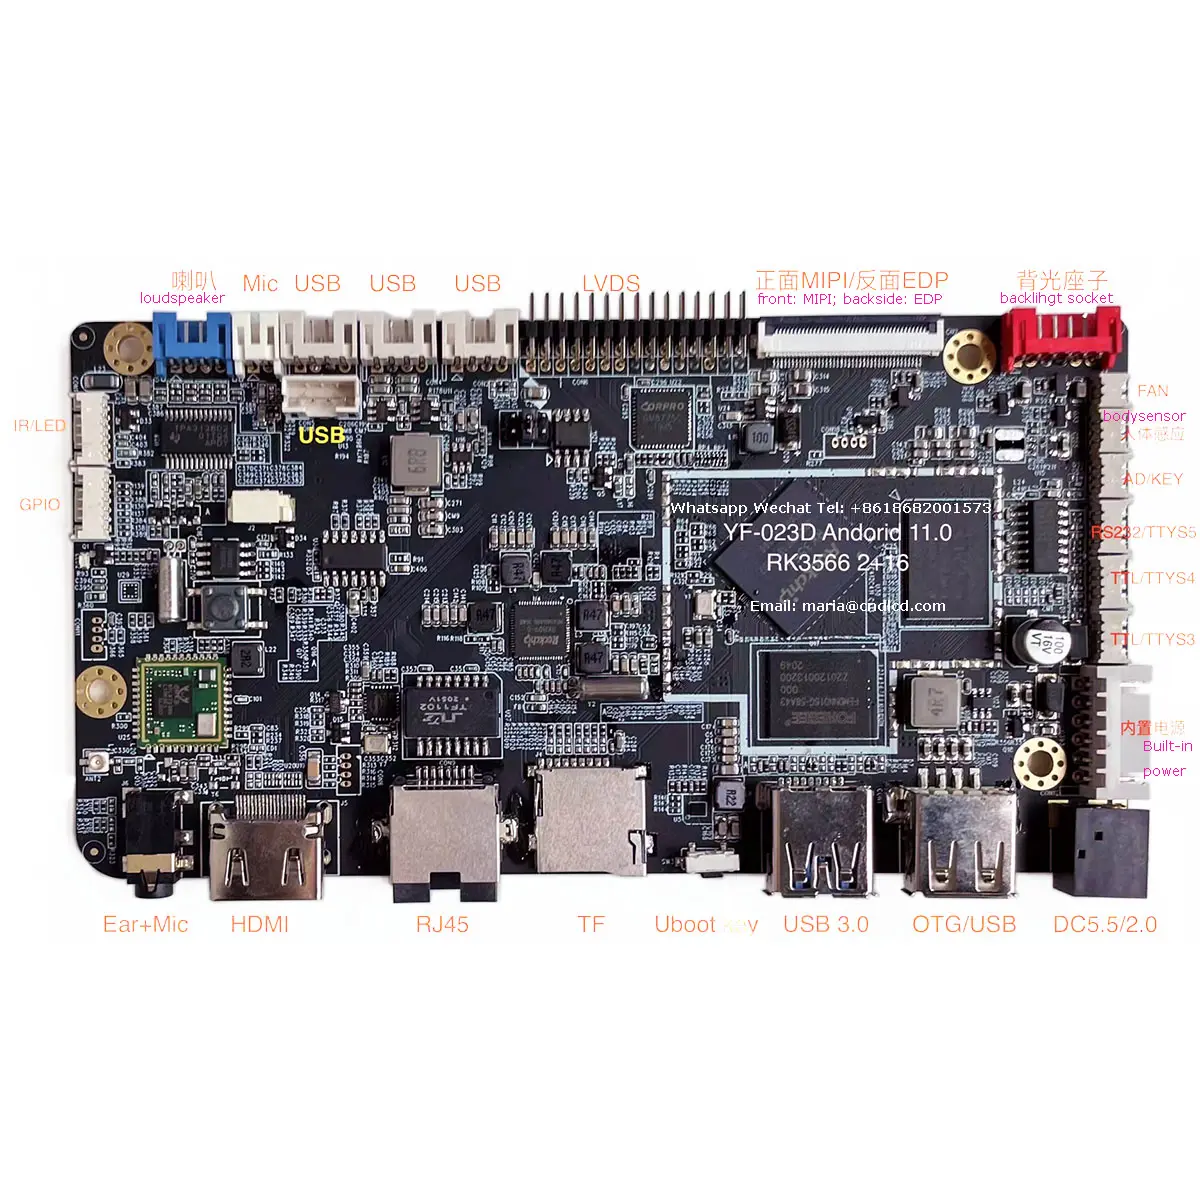 Controle inteligente rk3566, controlador android 11 para mãe, driver mainboard para tft, lcd, wifi, ethernet, hdm, i rs232, rj45, lvds, edp mipi